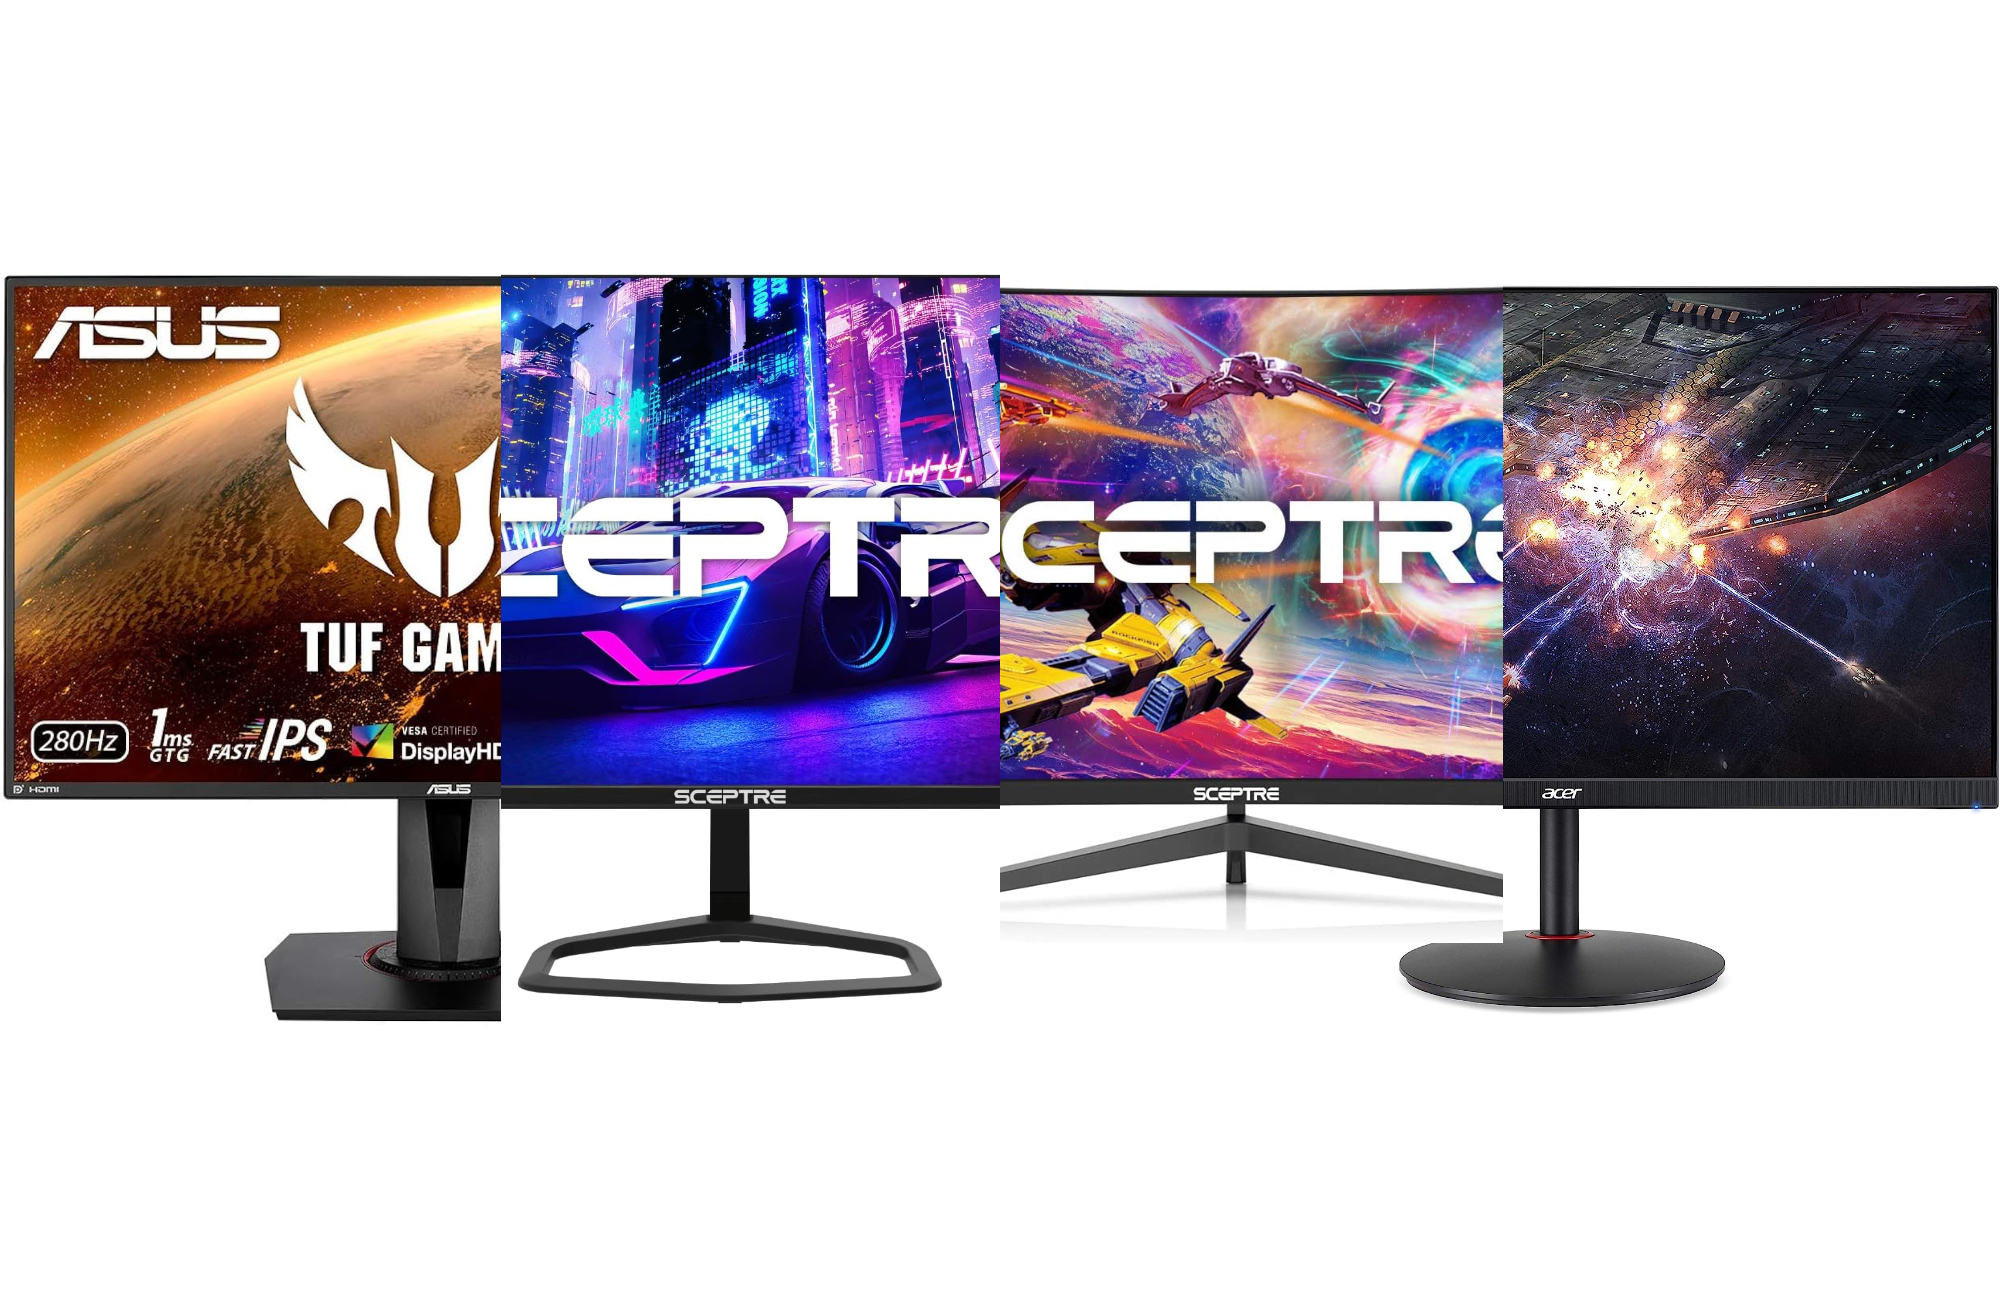 The best 1080p gaming monitors